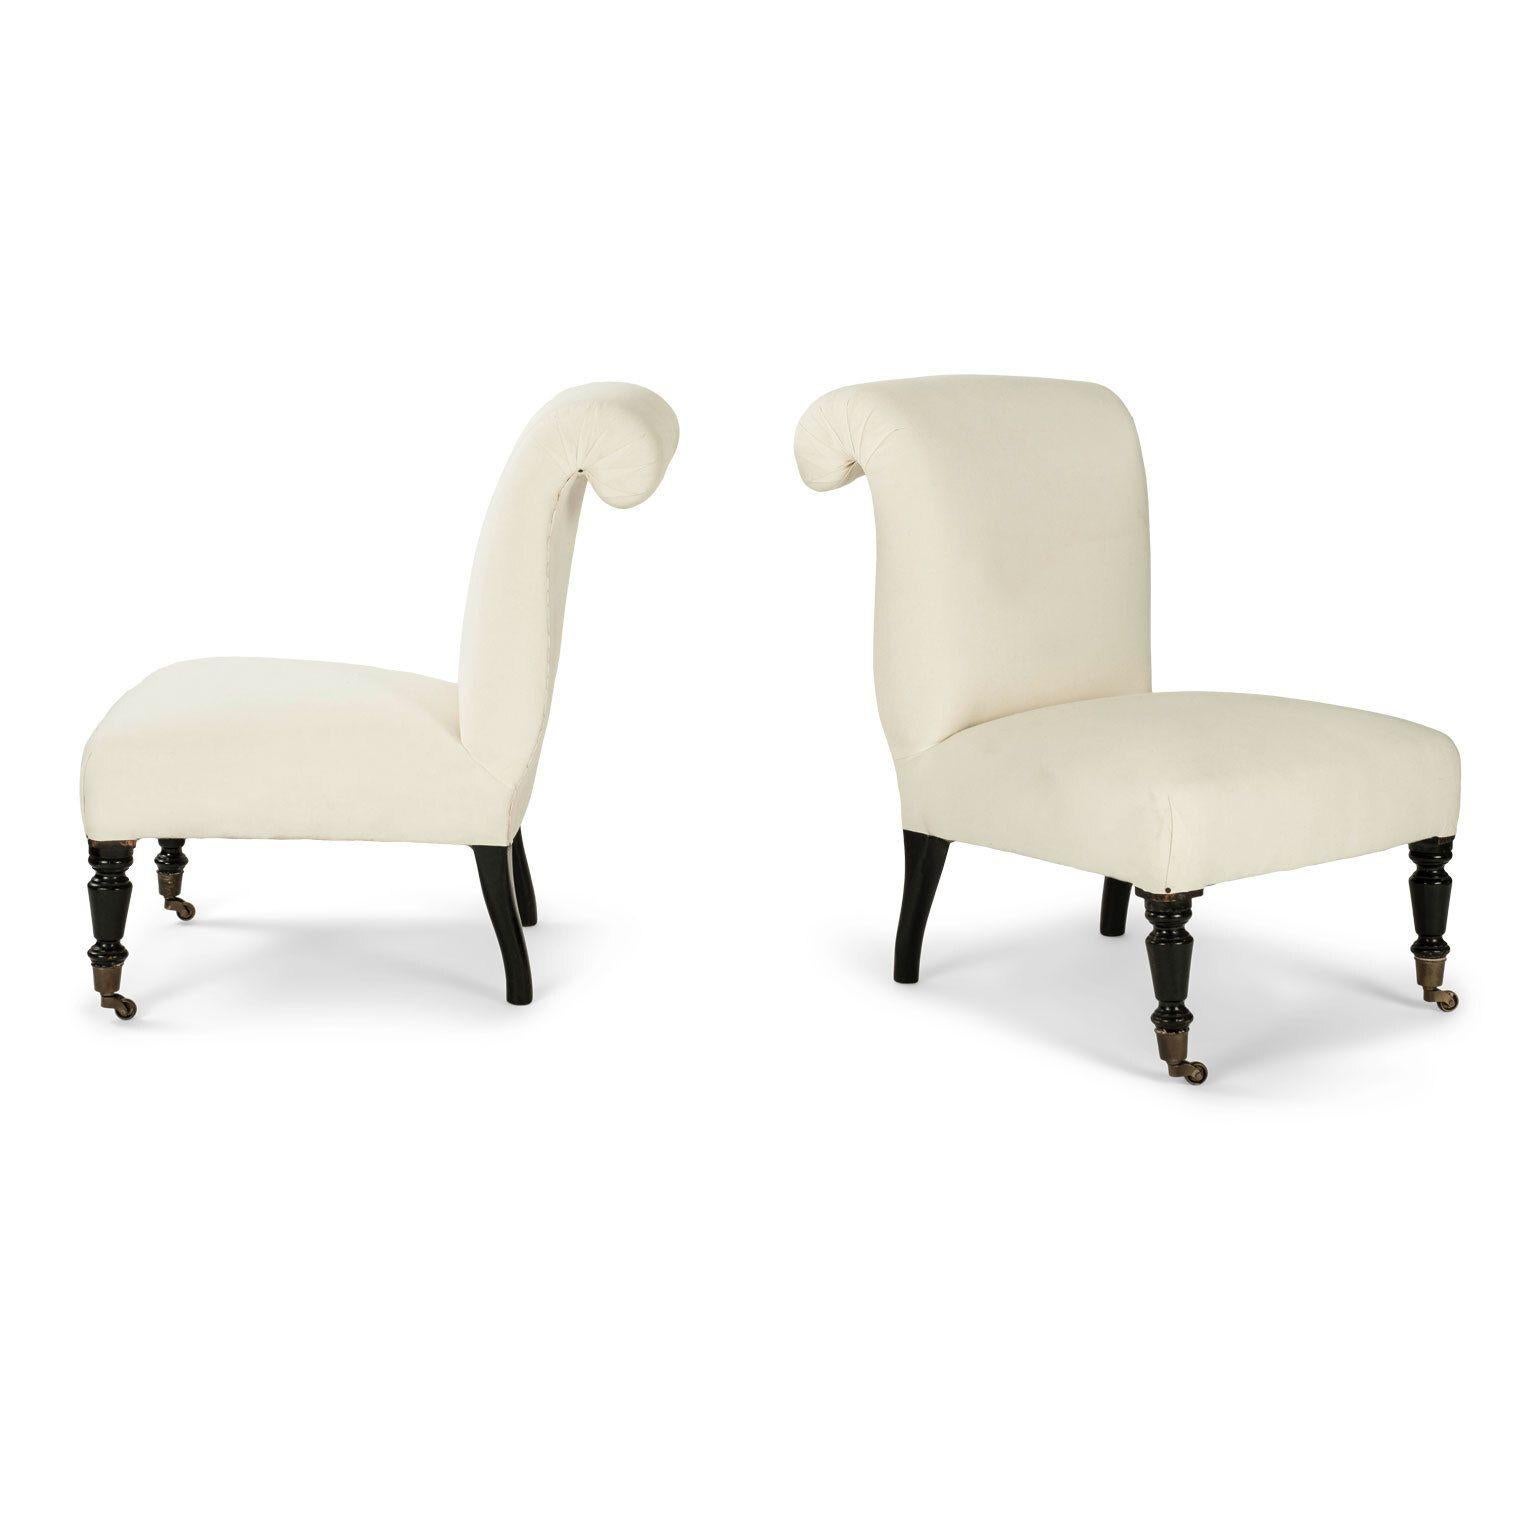 Hand-Carved Pair of French Napoleon III Slipper Chairs Upholstered in White Linen